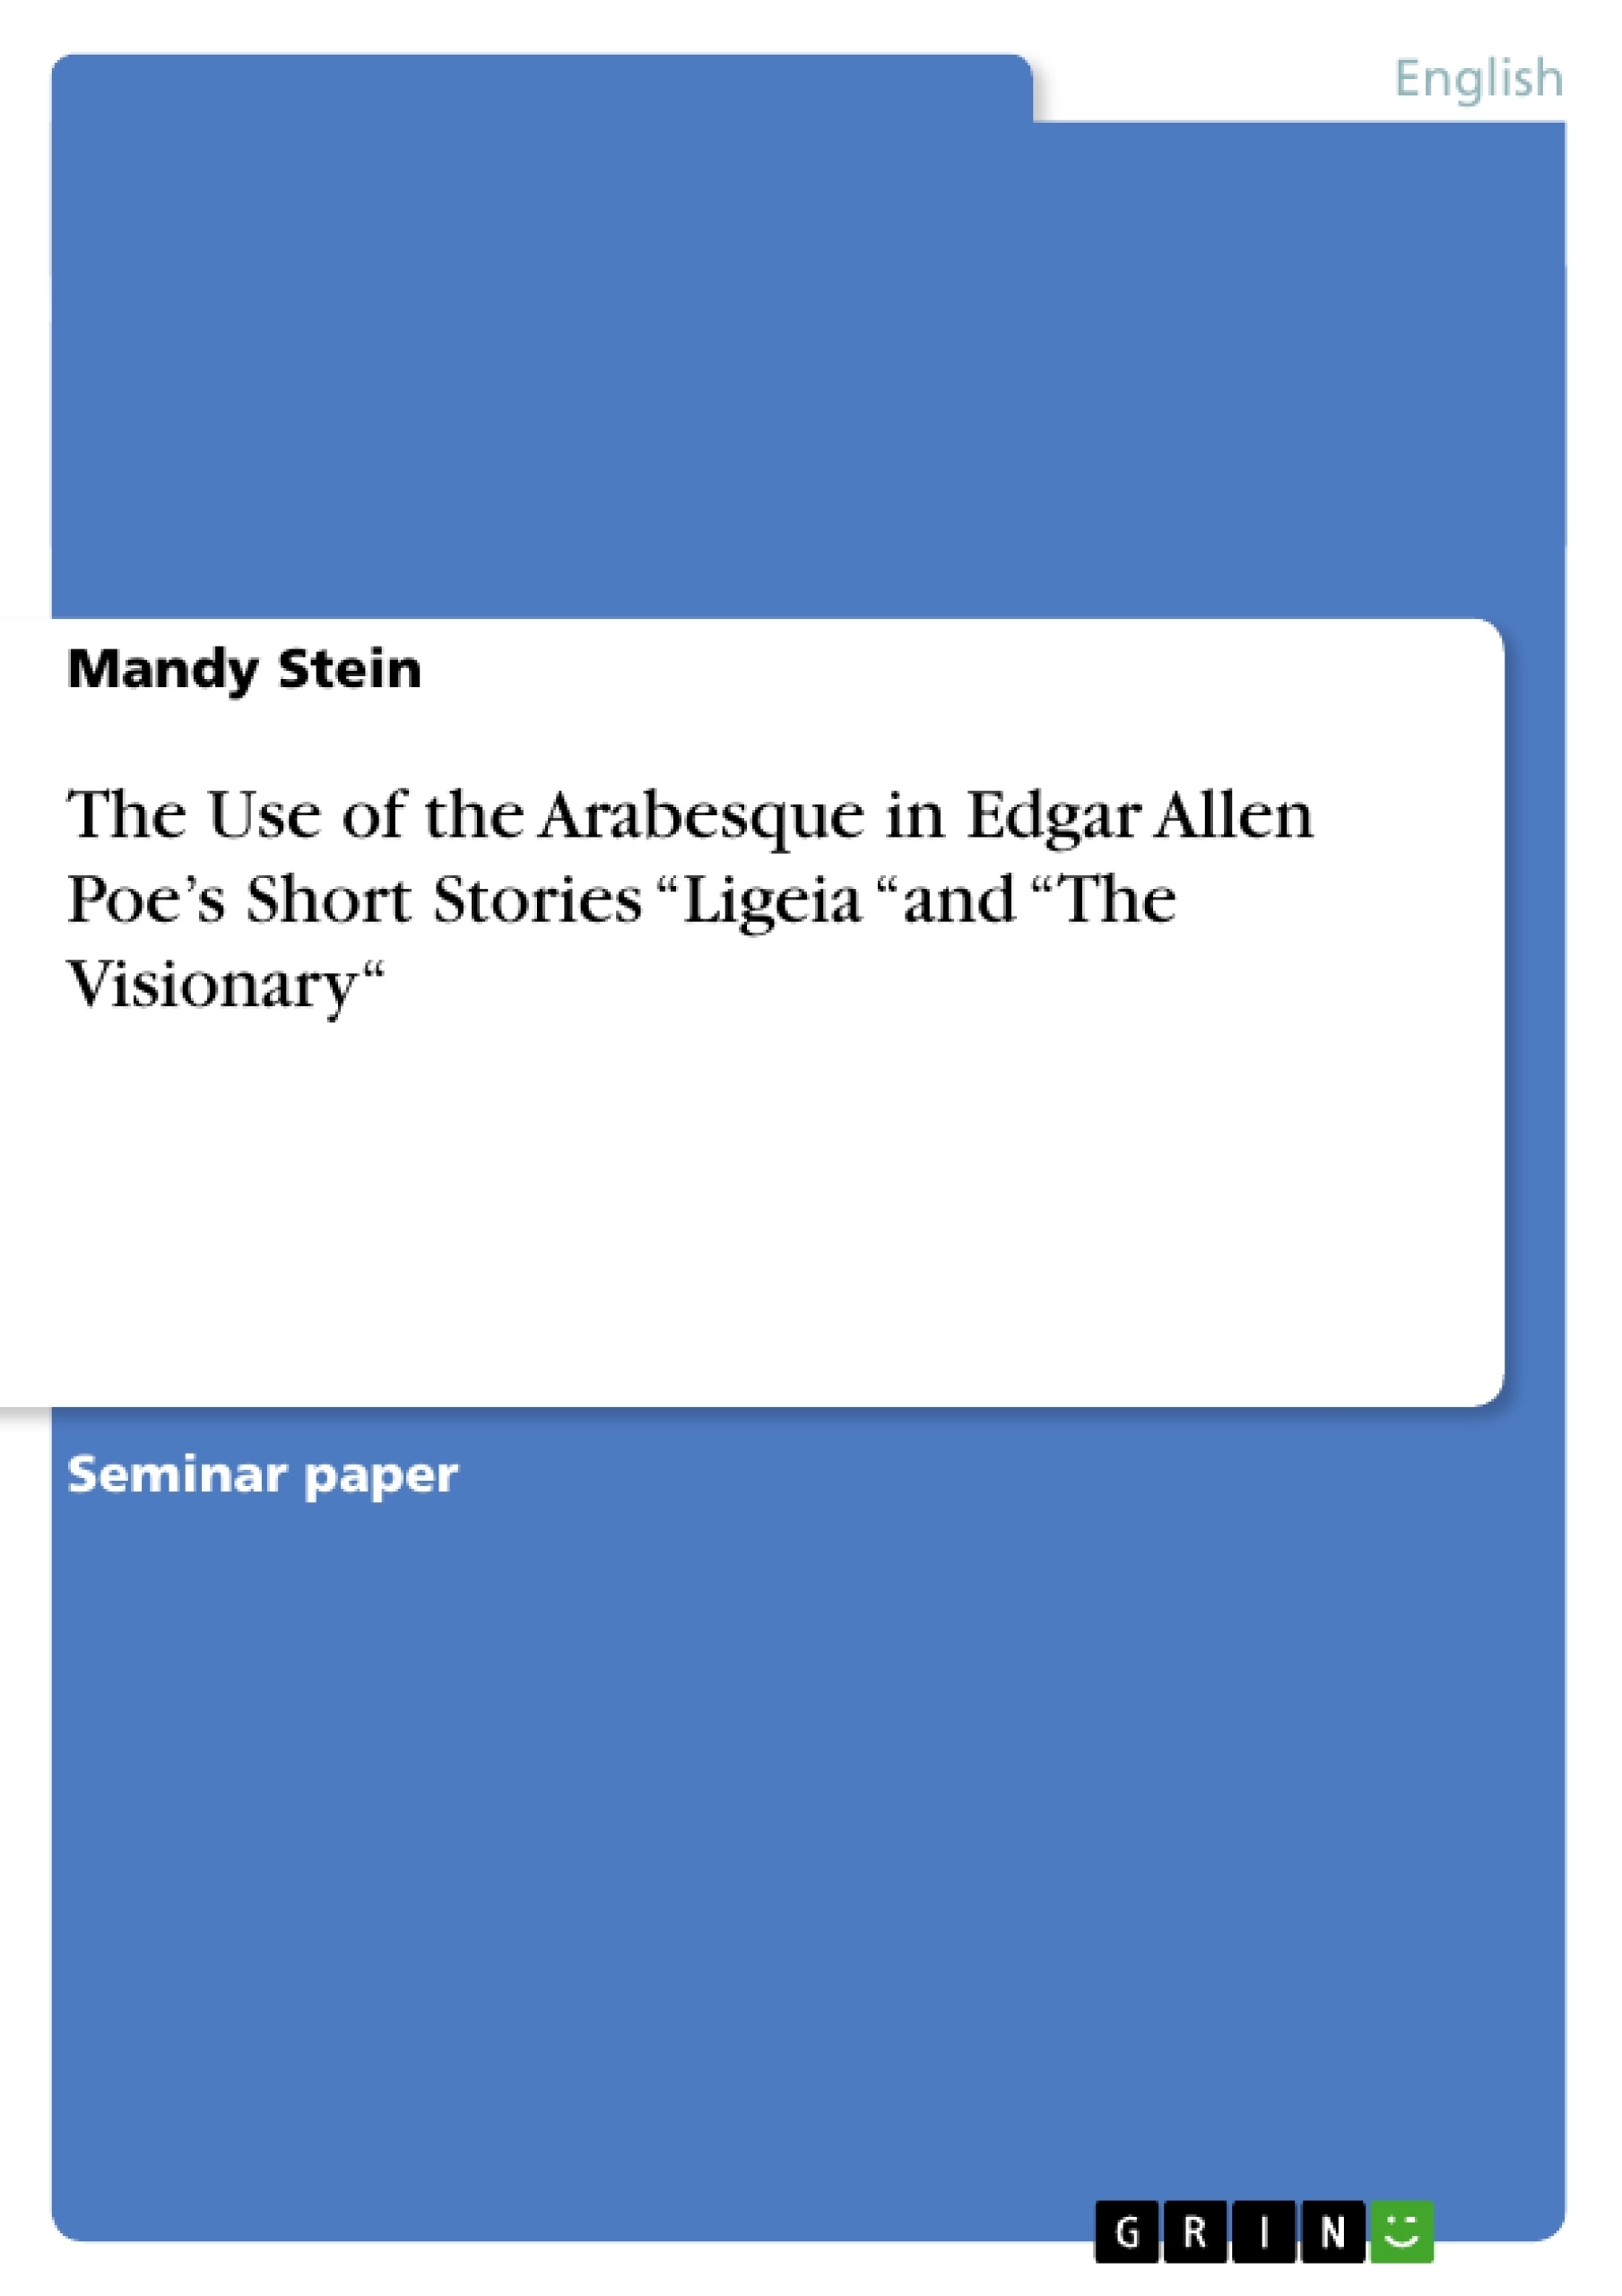 Title: The Use of the Arabesque in  Edgar Allen Poe’s Short Stories  “Ligeia “and “The Visionary“